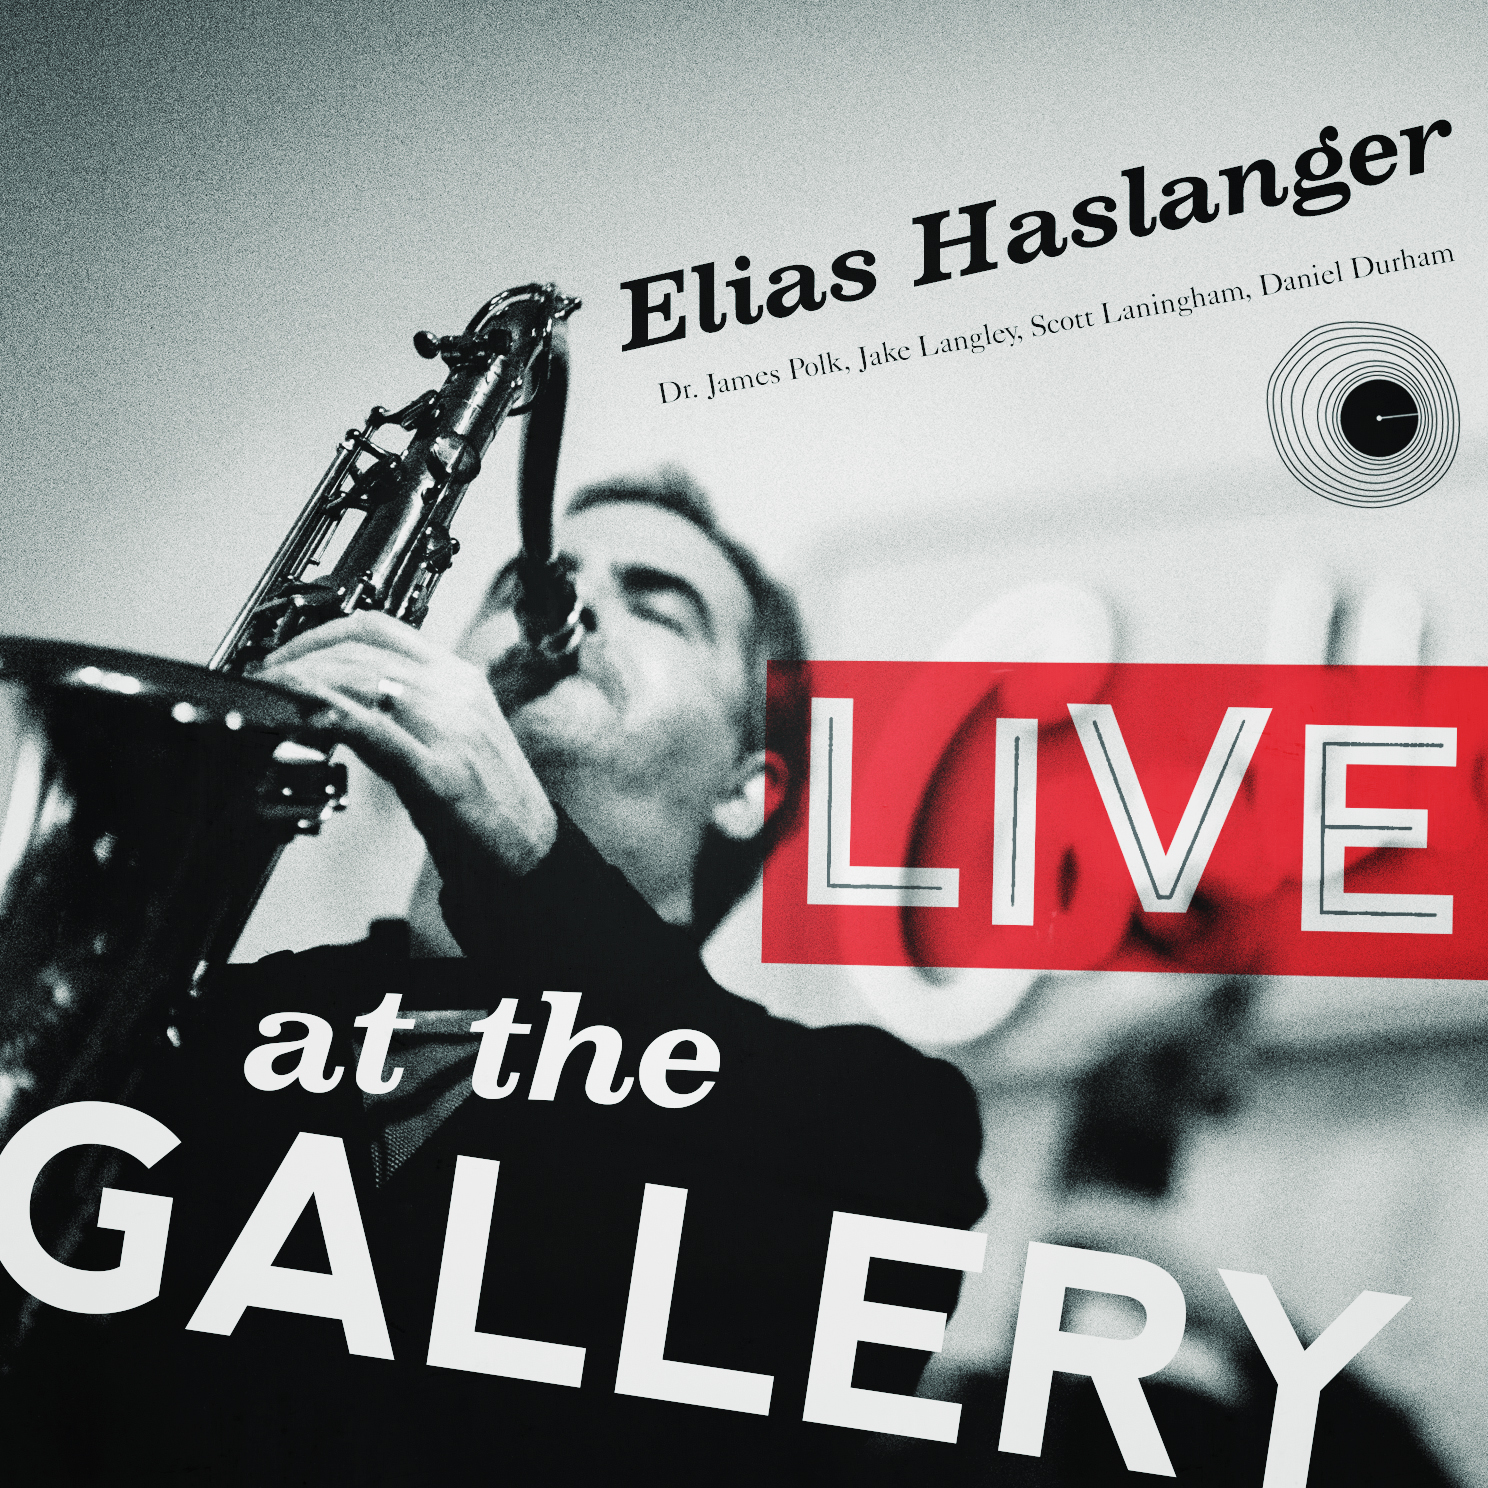 Live at the Gallery